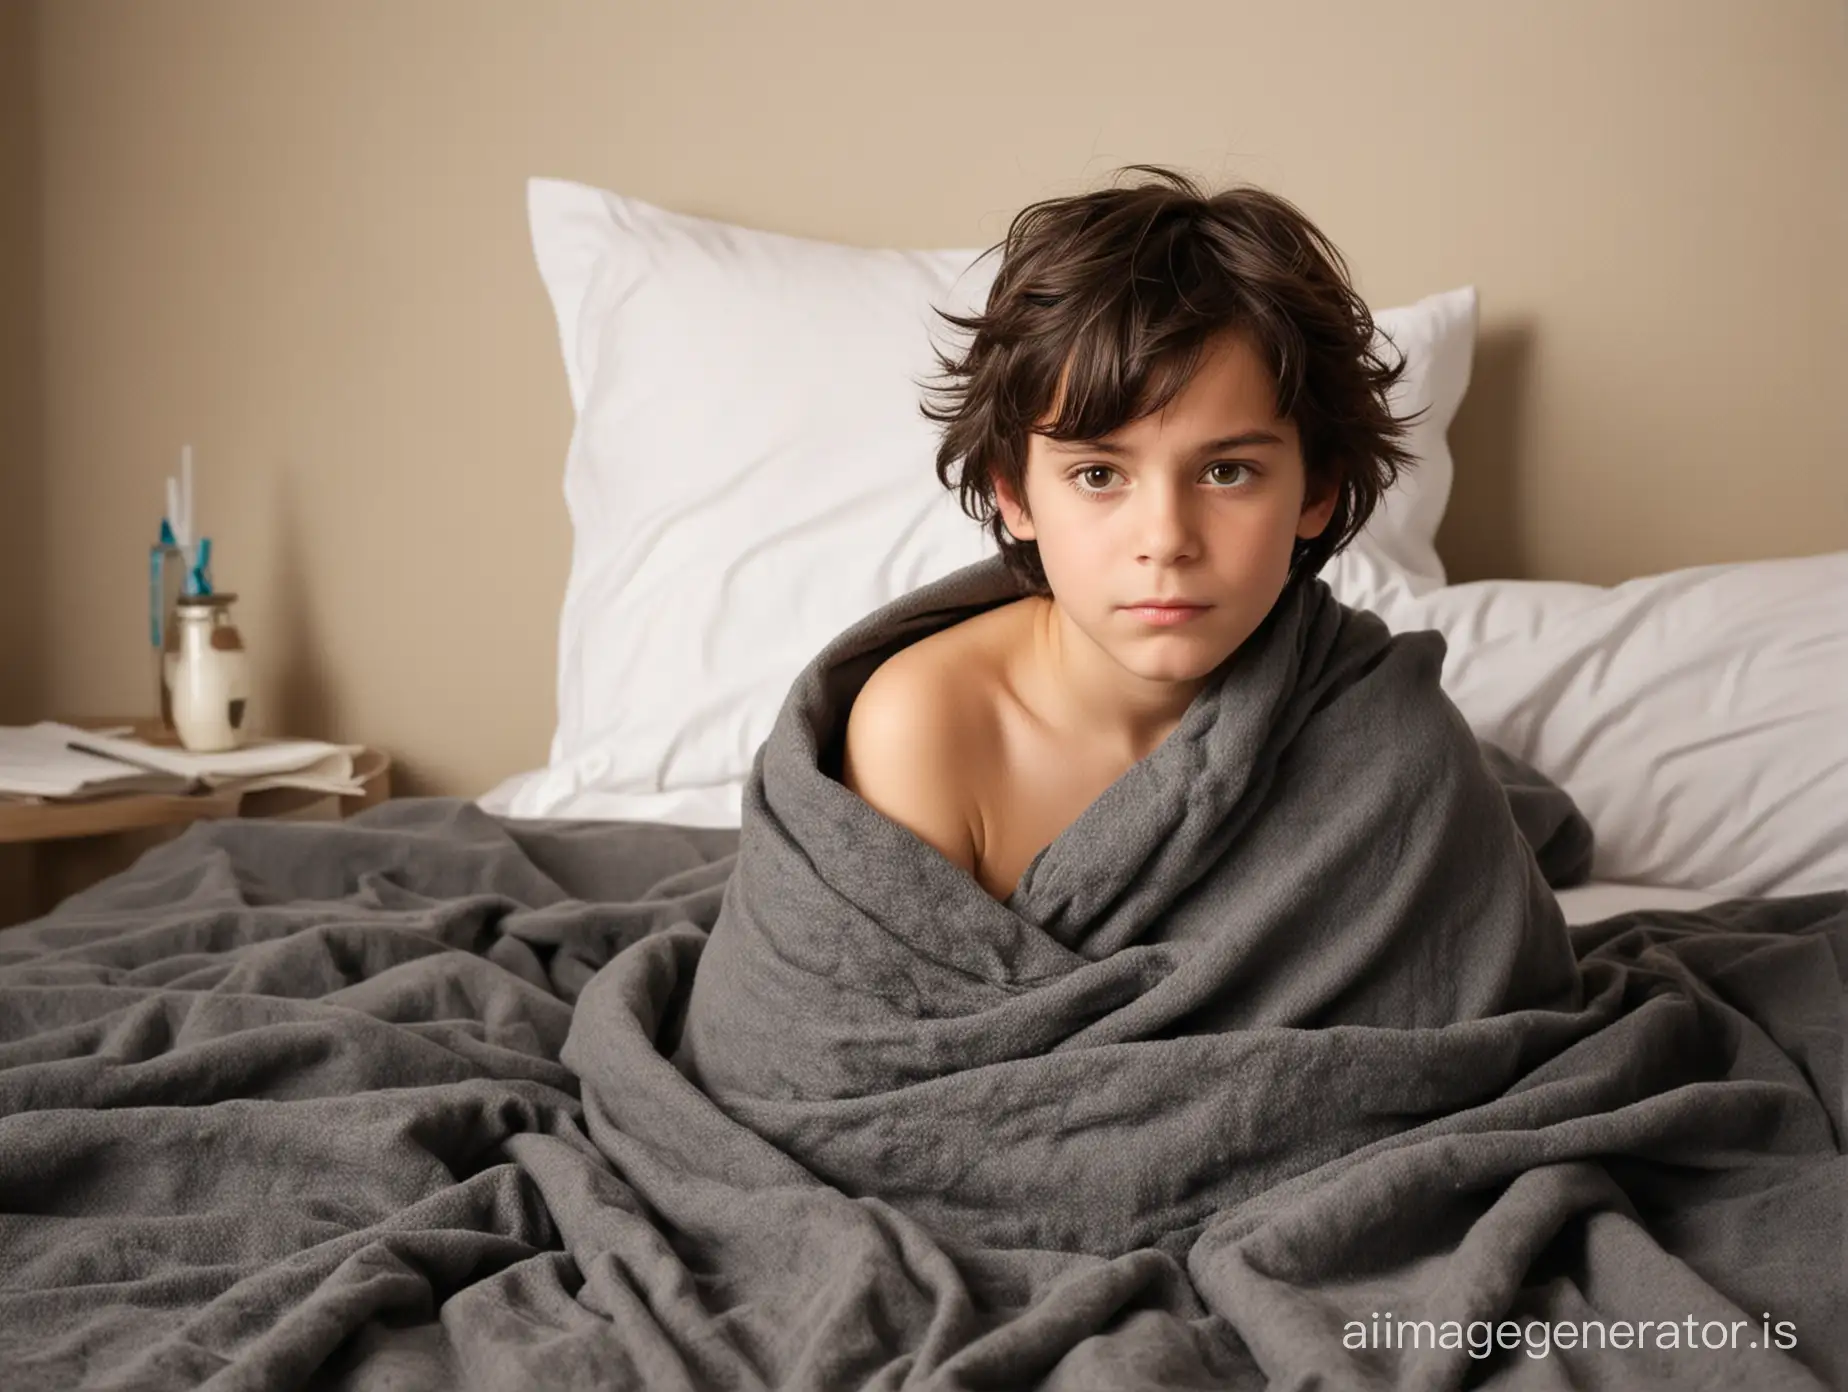 room, bed, there lies a 7-year-old boy with short, tousled dark hair, he's wrapped in a blanket, sick, with a thermometer under his armpit.